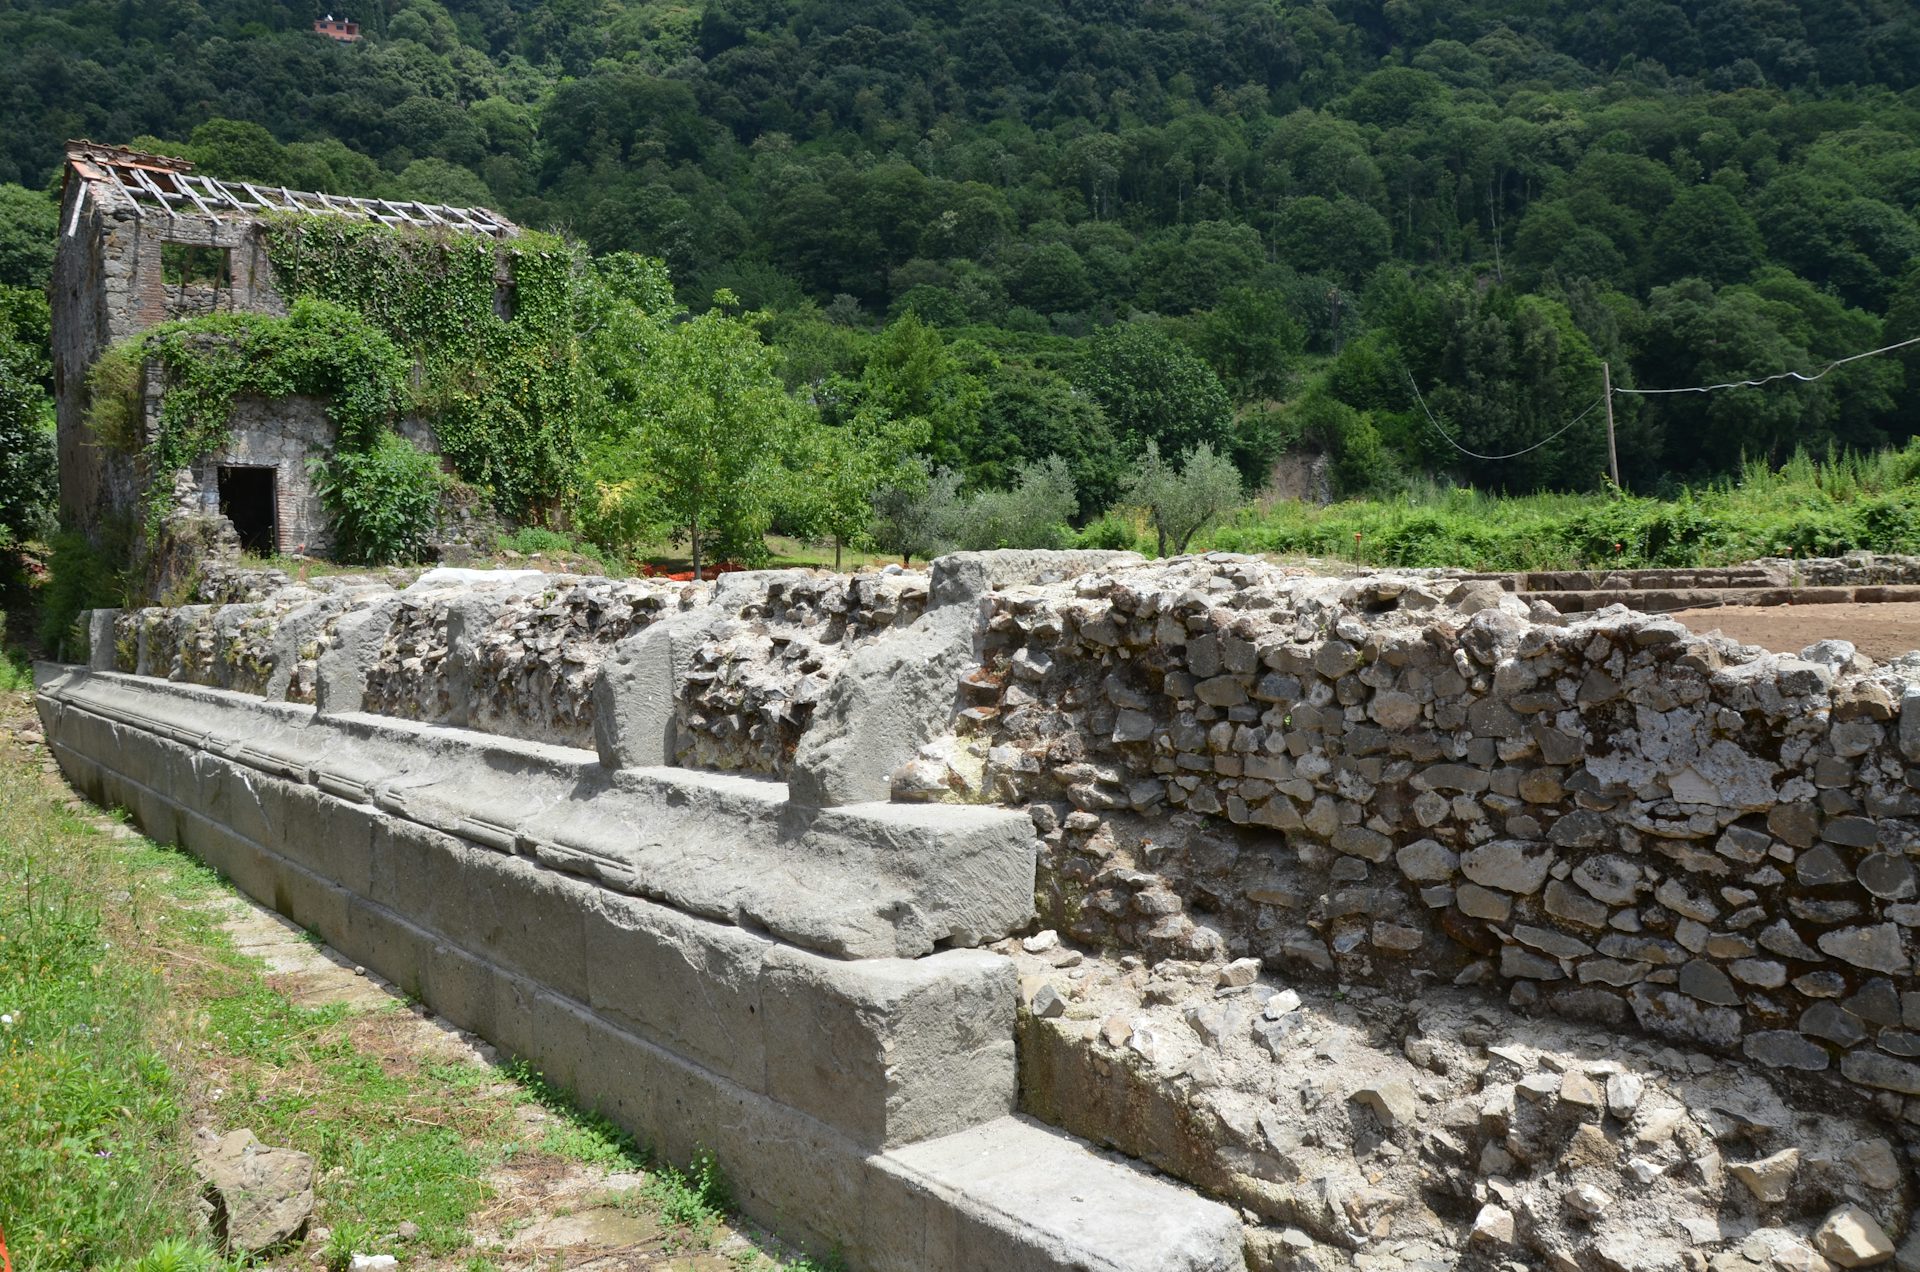 Ruins of the Temple of Diana Nemorensis at Nemi Italy